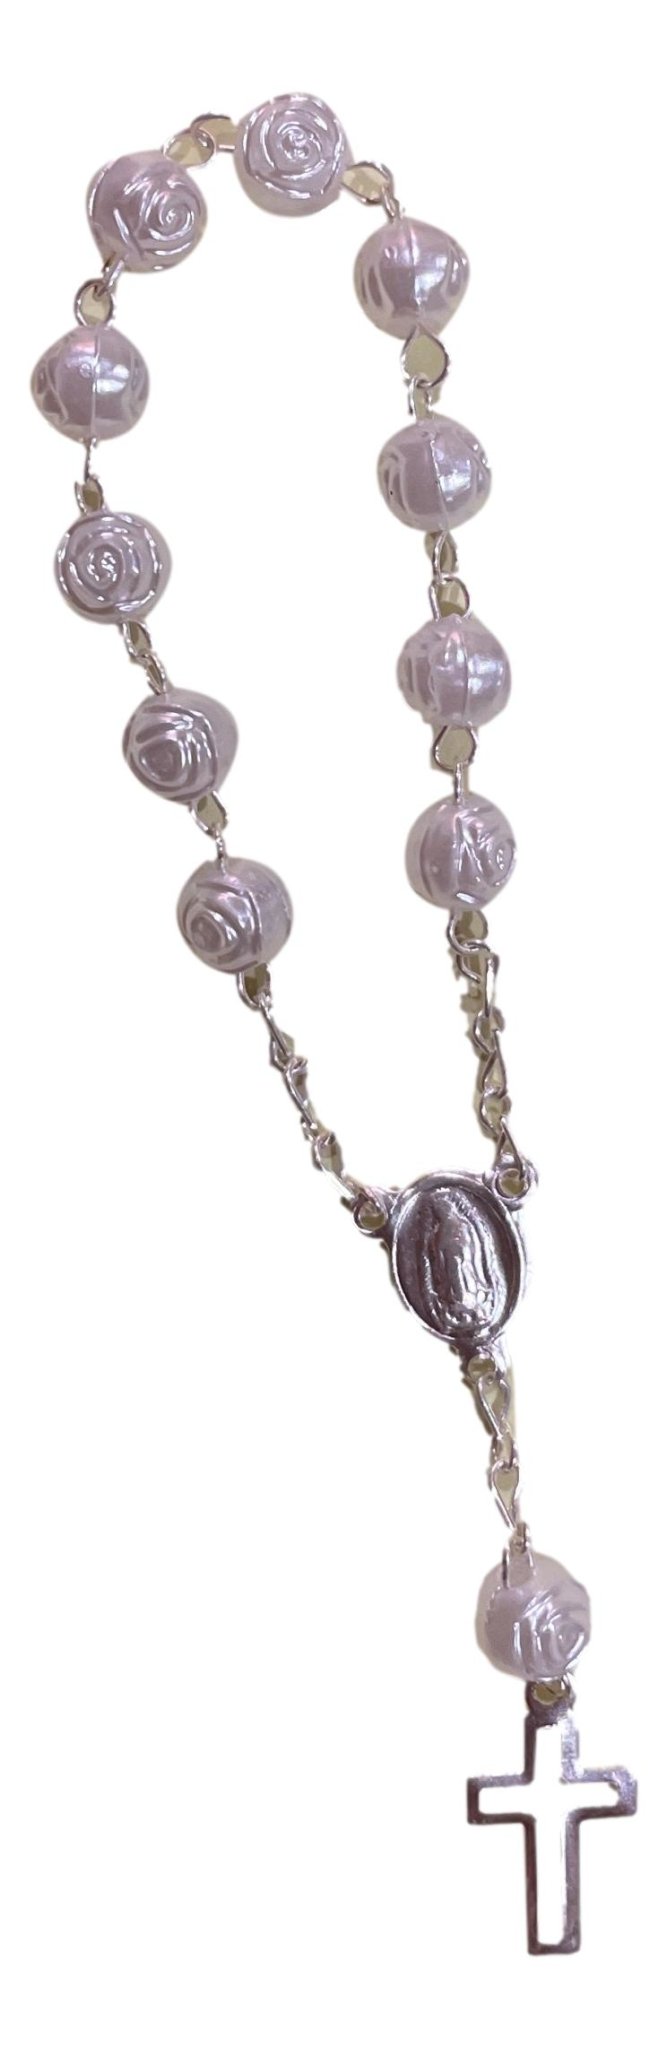 Rosary Mini White Rose Acrylic Beads Silver Accent Tin Cross & Medallion 4" L - Ysleta Mission Gift Shop- VOTED El Paso's Best Gift Shop